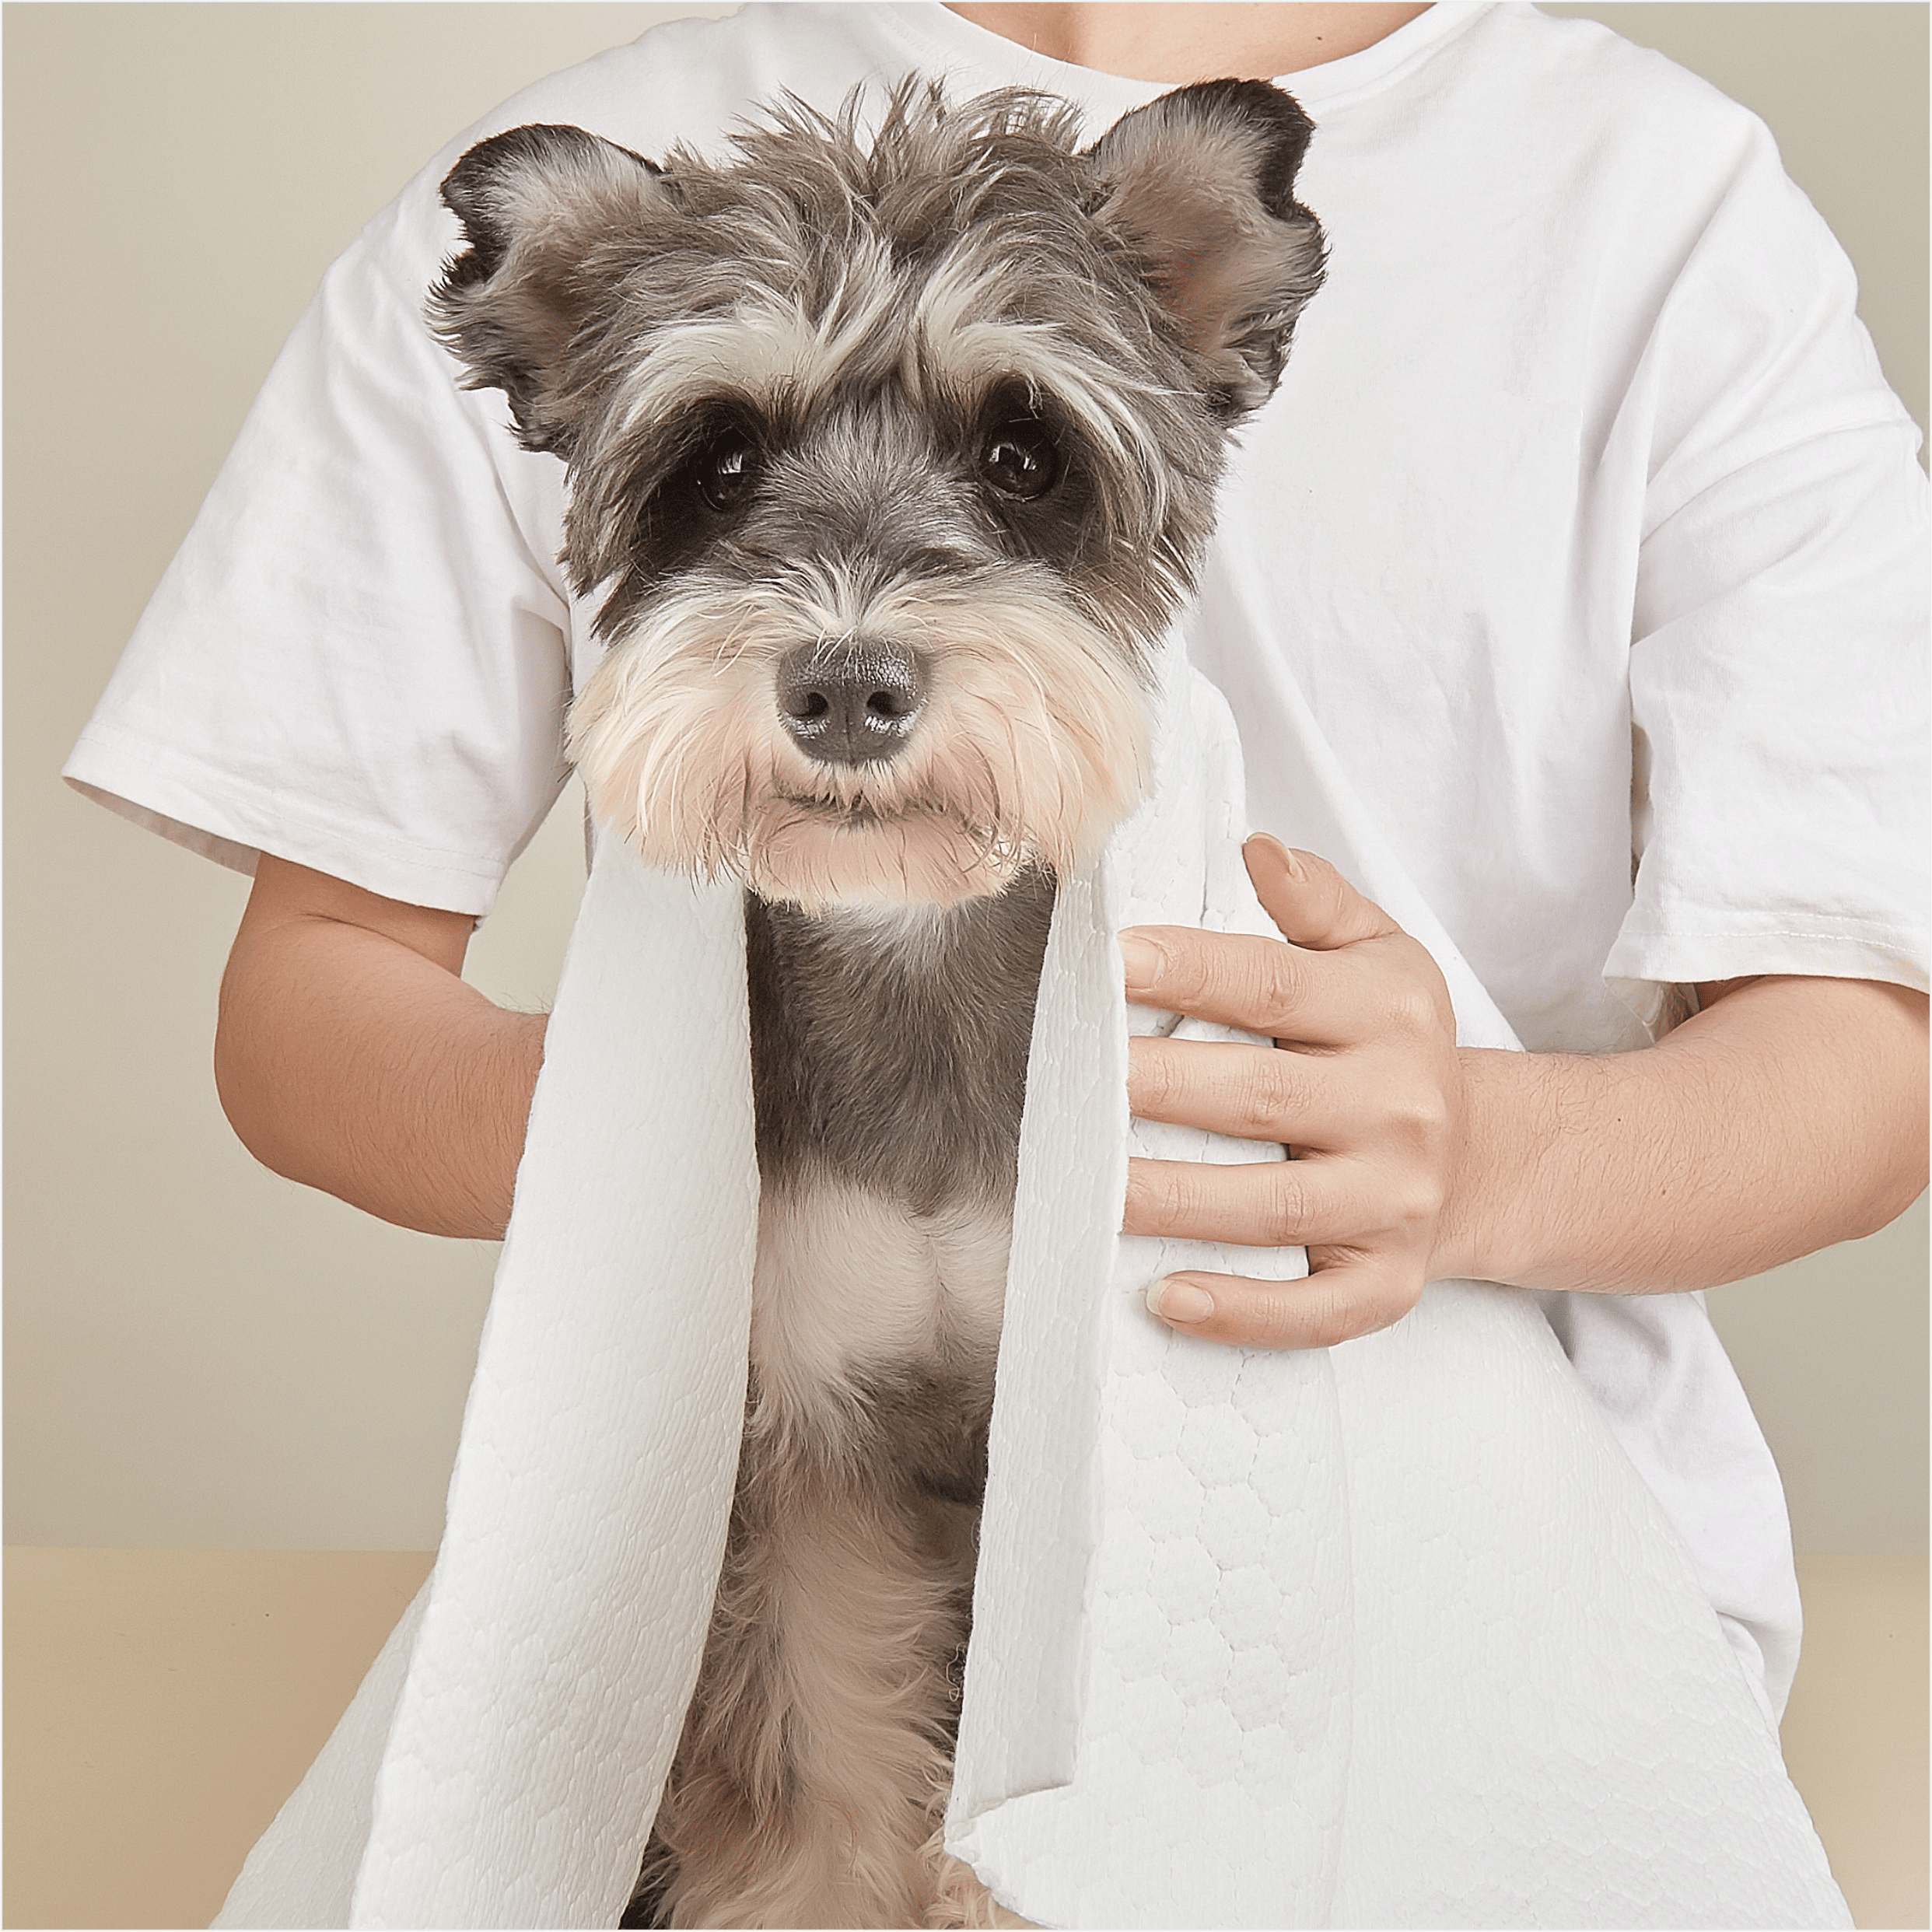 Fofos Disposable Towels for Dogs